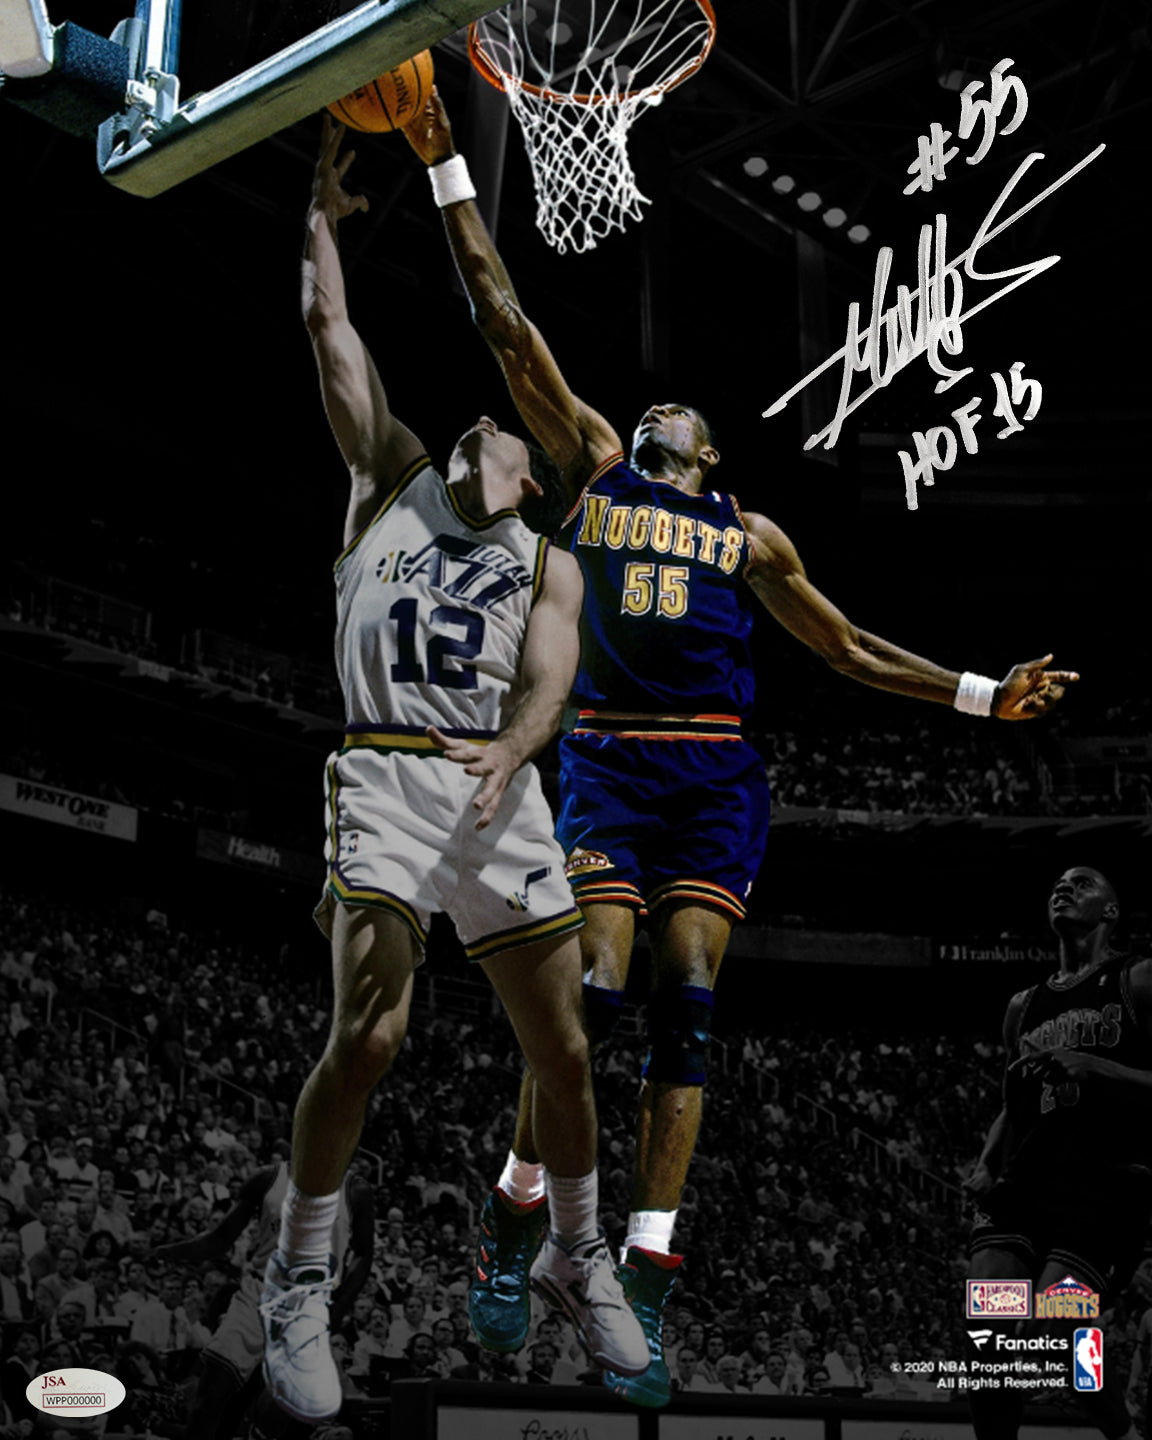 Dikembe Mutombo v Stockton Denver Nuggets Autographed Basketball Photo Inscribed Hall of Fame - Dynasty Sports & Framing 